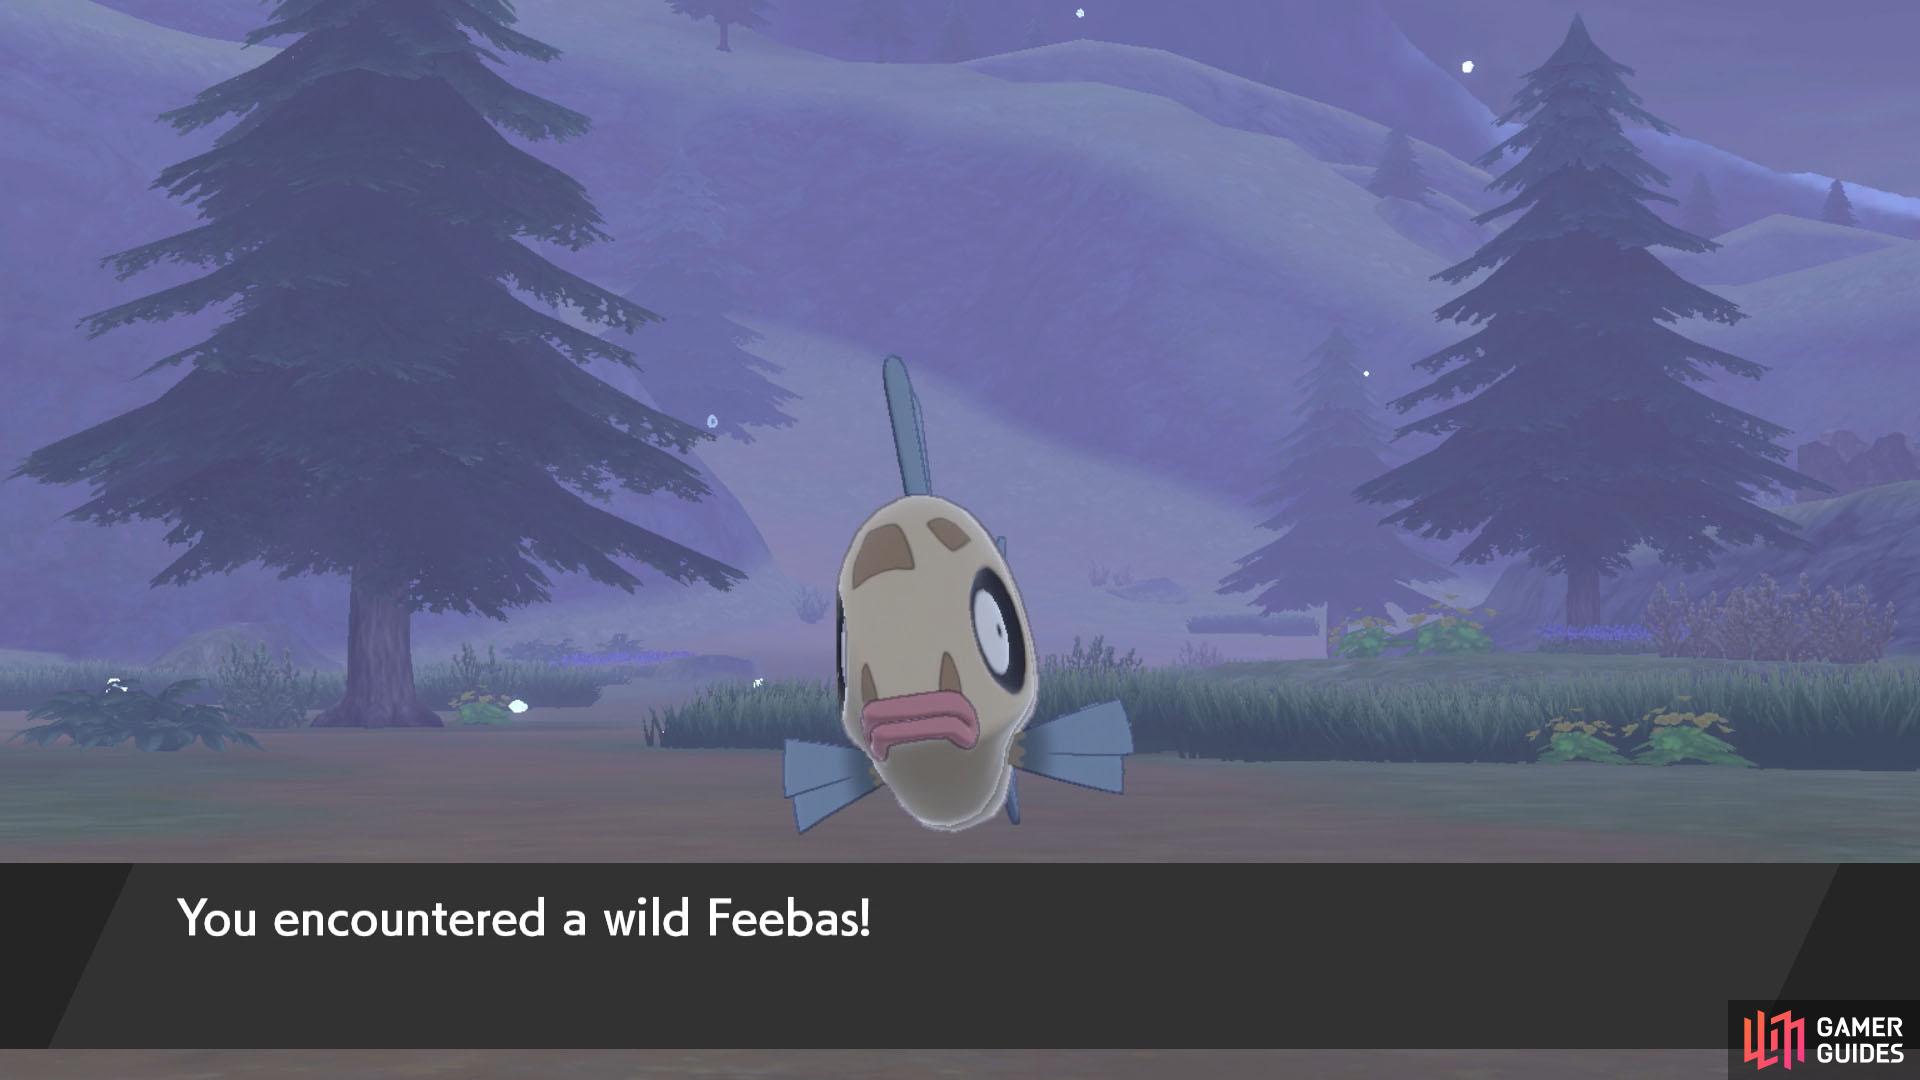 There's an exceedingly low chance of finding Feebas when traveling across water.